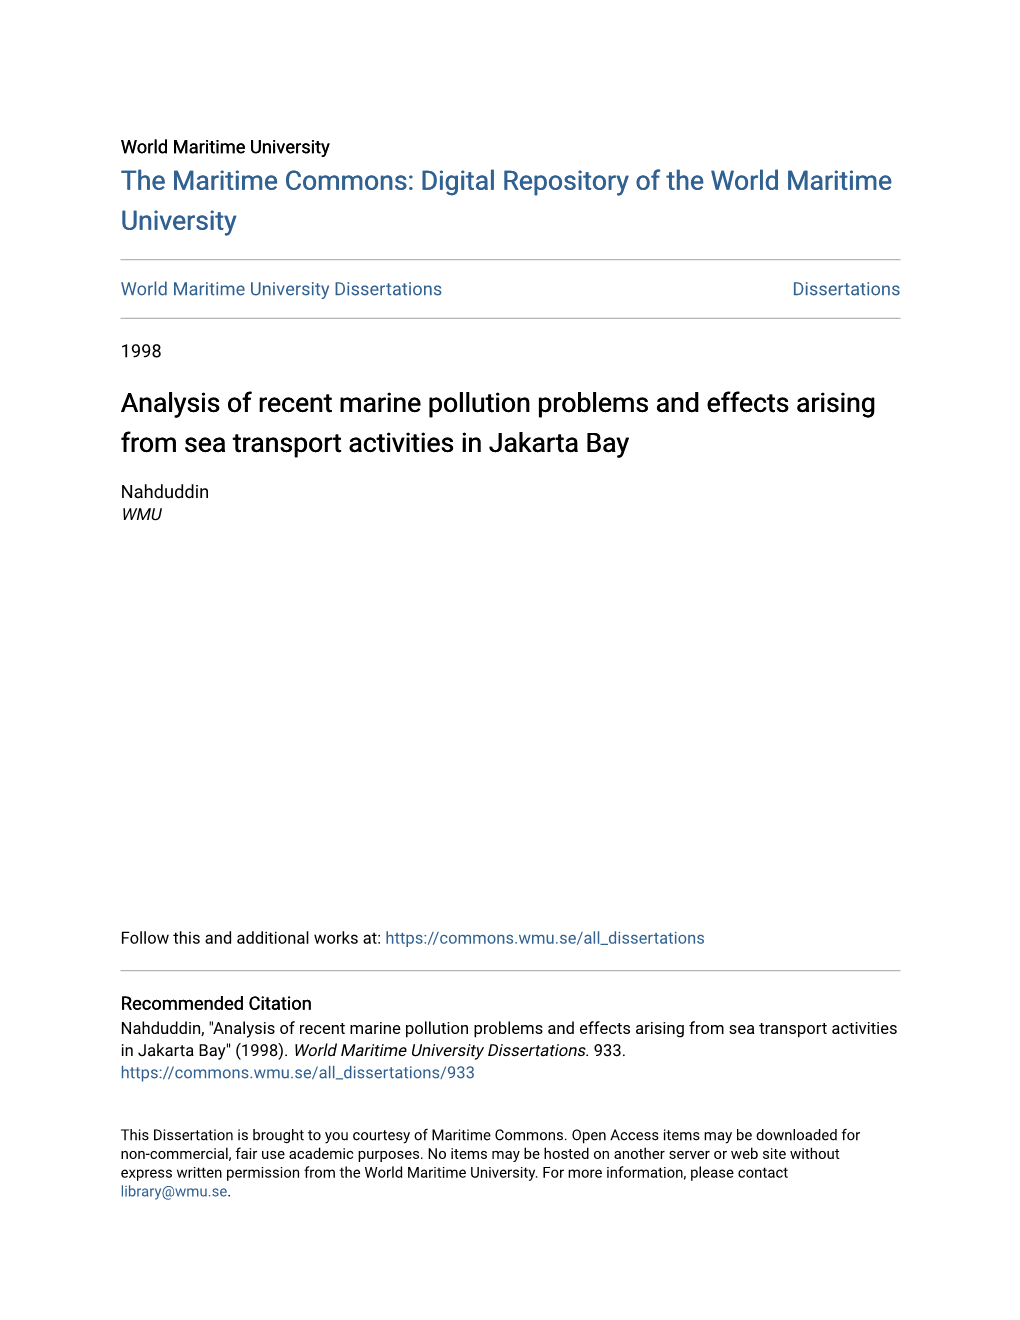 Analysis of Recent Marine Pollution Problems and Effects Arising from Sea Transport Activities in Jakarta Bay